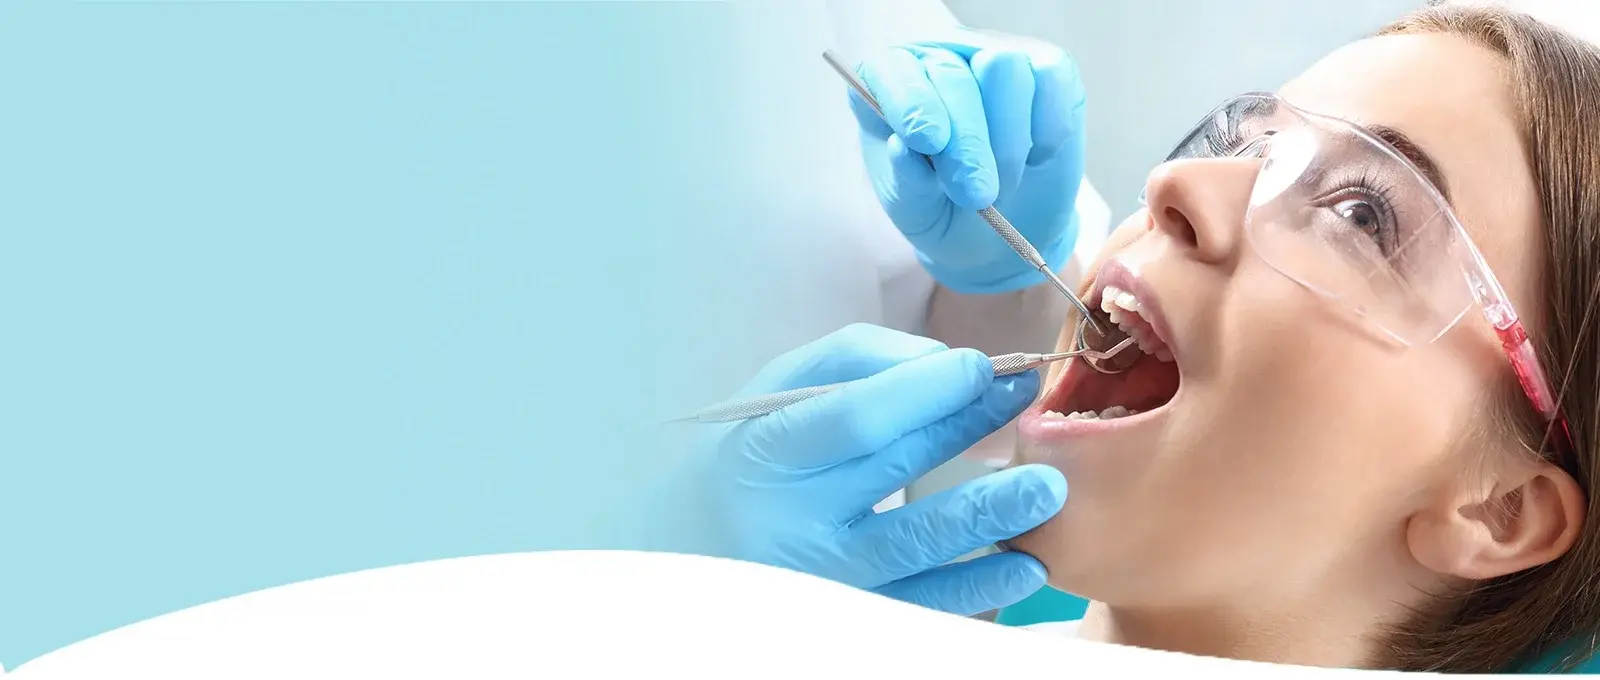 Experience effective Root Canal treatments at West Lynde Dental in Whitby, for lasting relief